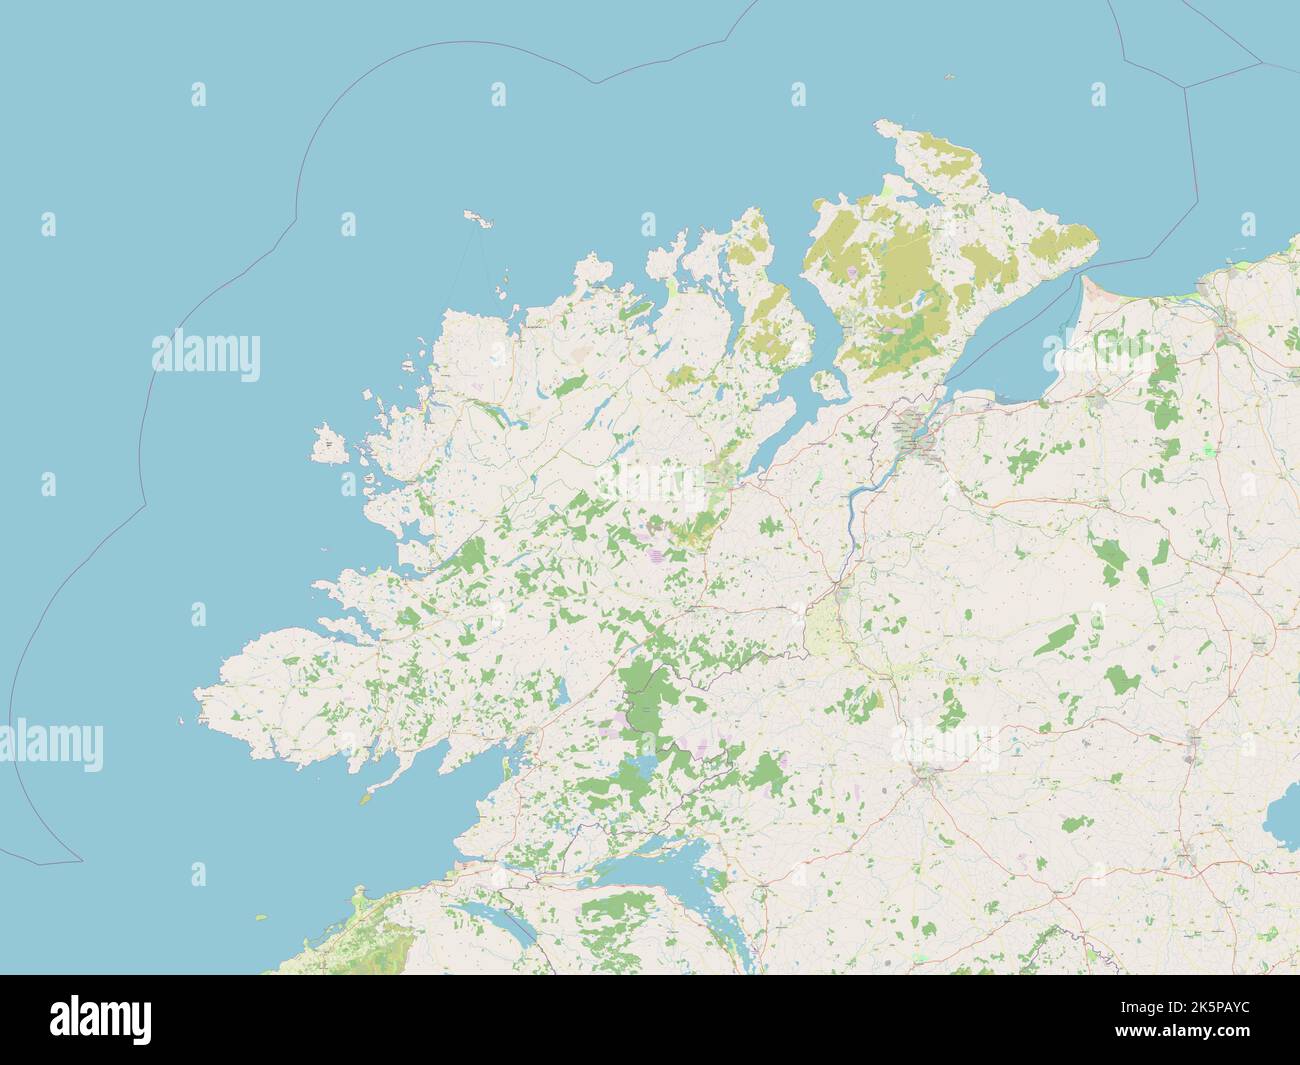 Donegal, county of Ireland. Open Street Map Stock Photo